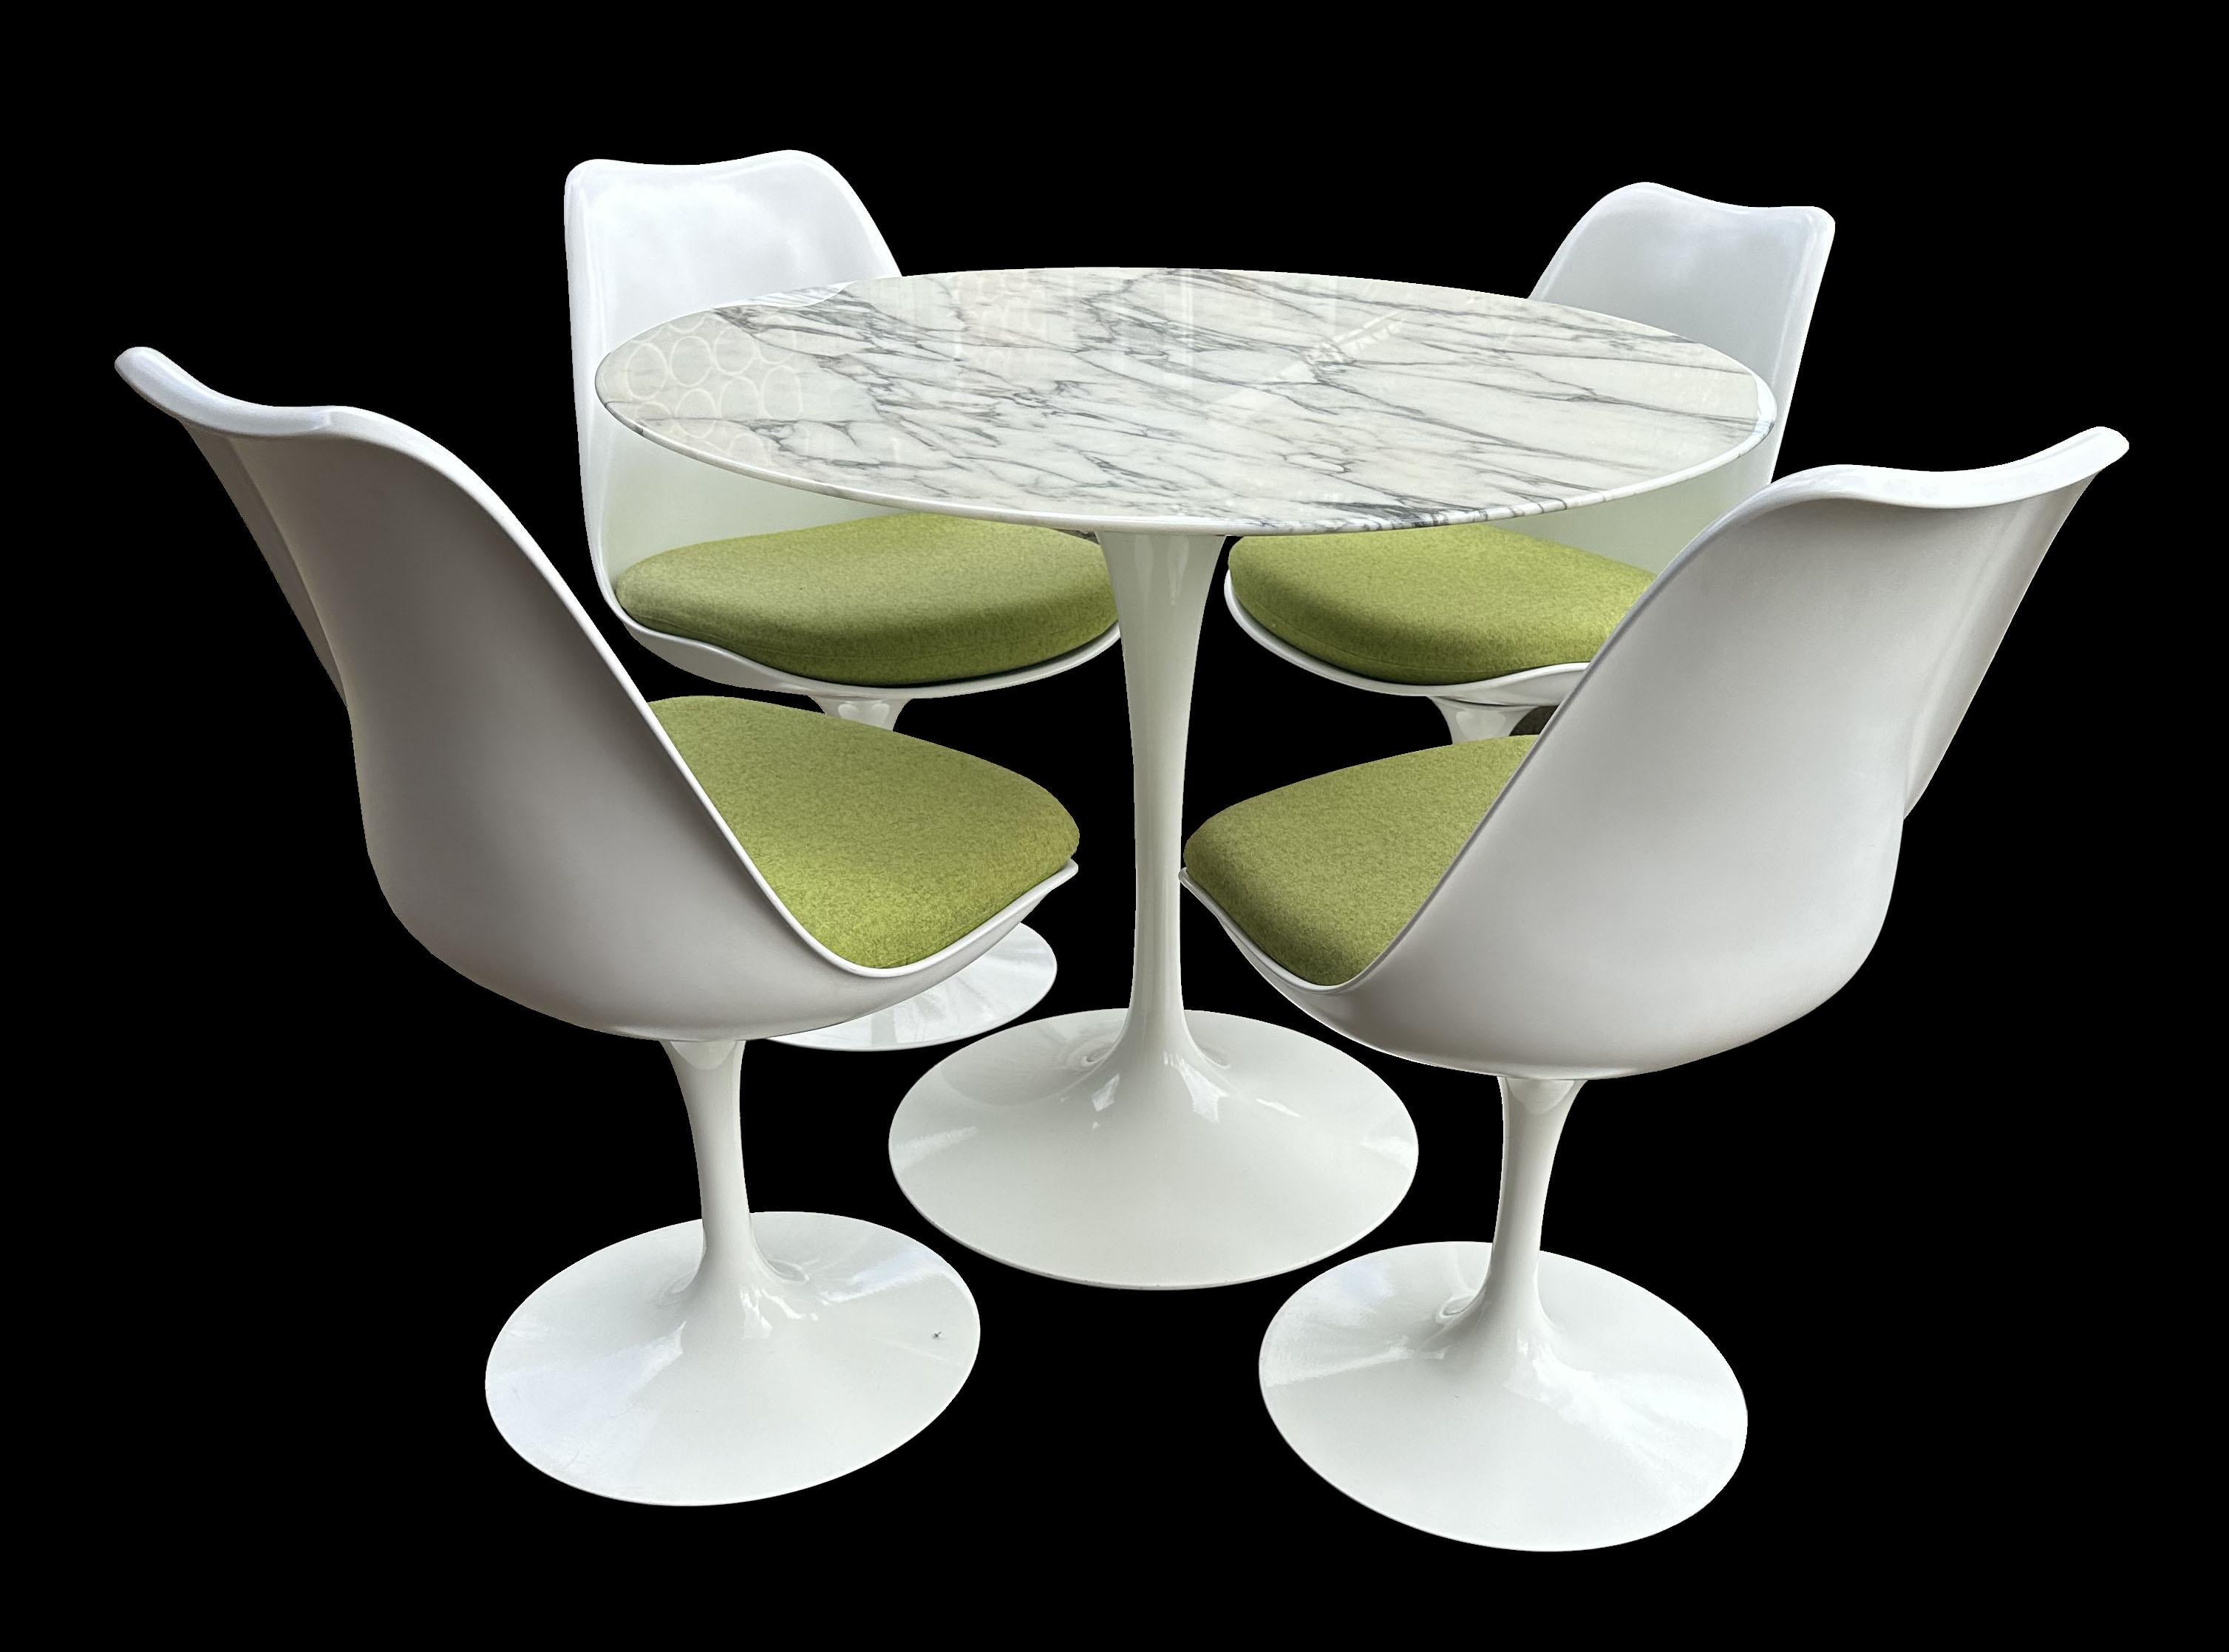 A really good example of an original Knoll produced Tulip set by Eero Saarinen.
The table with a calacatta top, and the four swivel chairs with original green Knoll fabric cushions.The price is for the set which is in overall great condition.
The